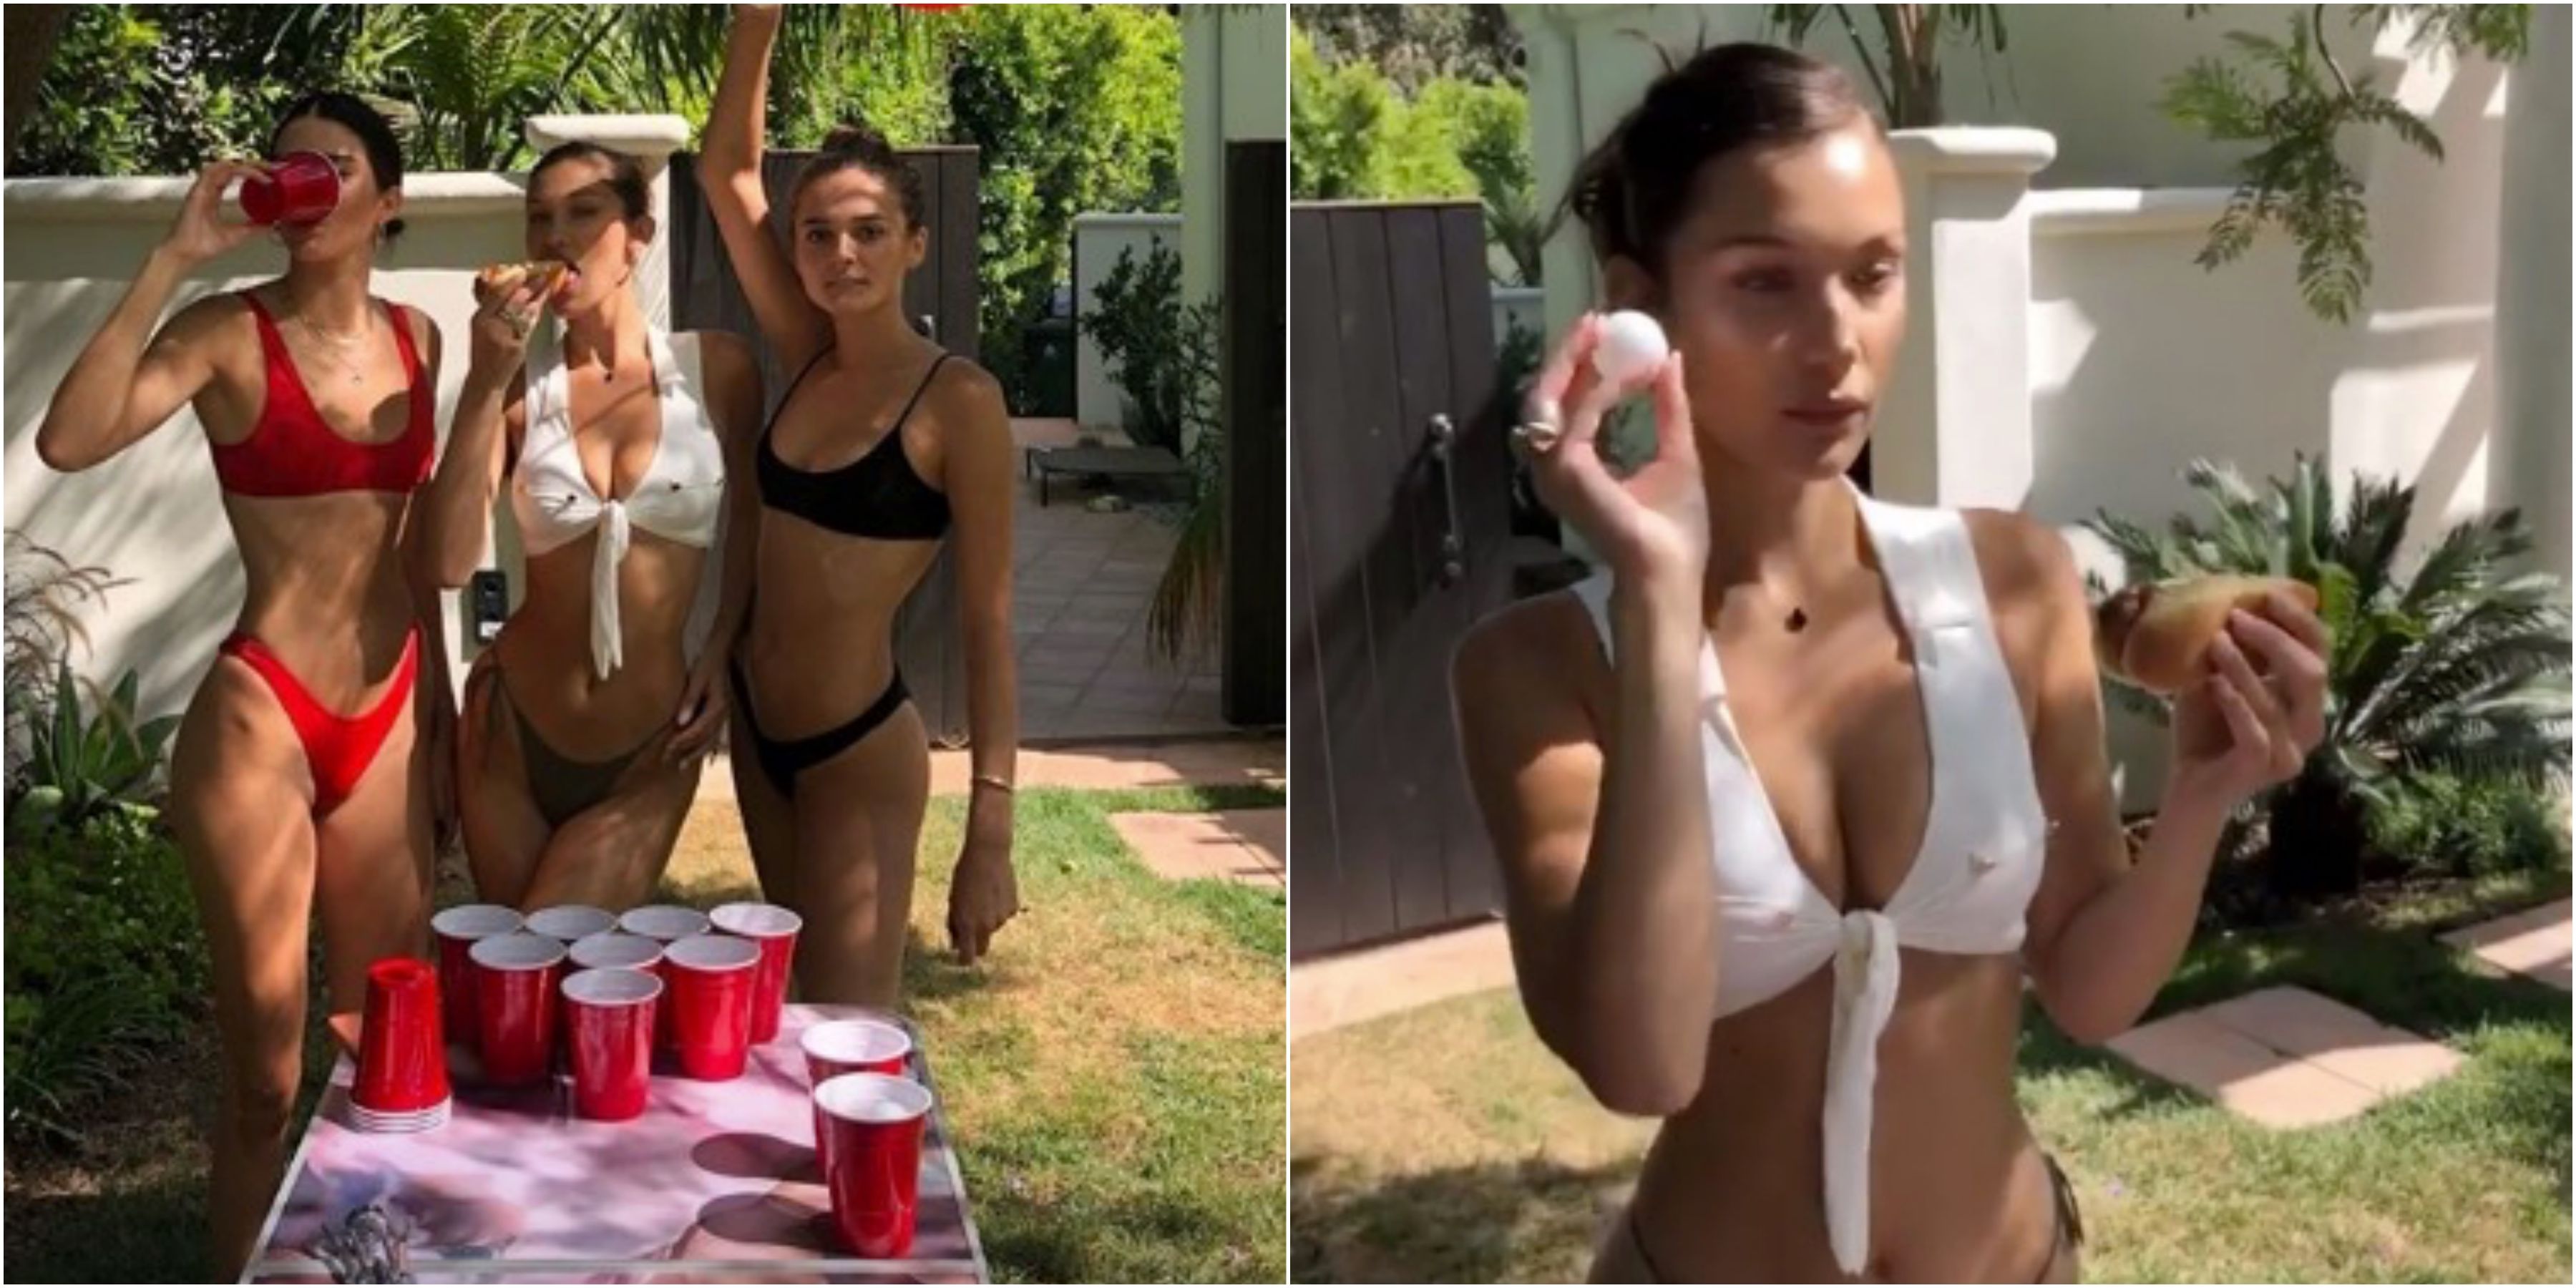 Kendall Jenner And Bella Hadid Join Kim Kardashian For Labour Day BBQ With All The Tequila pic